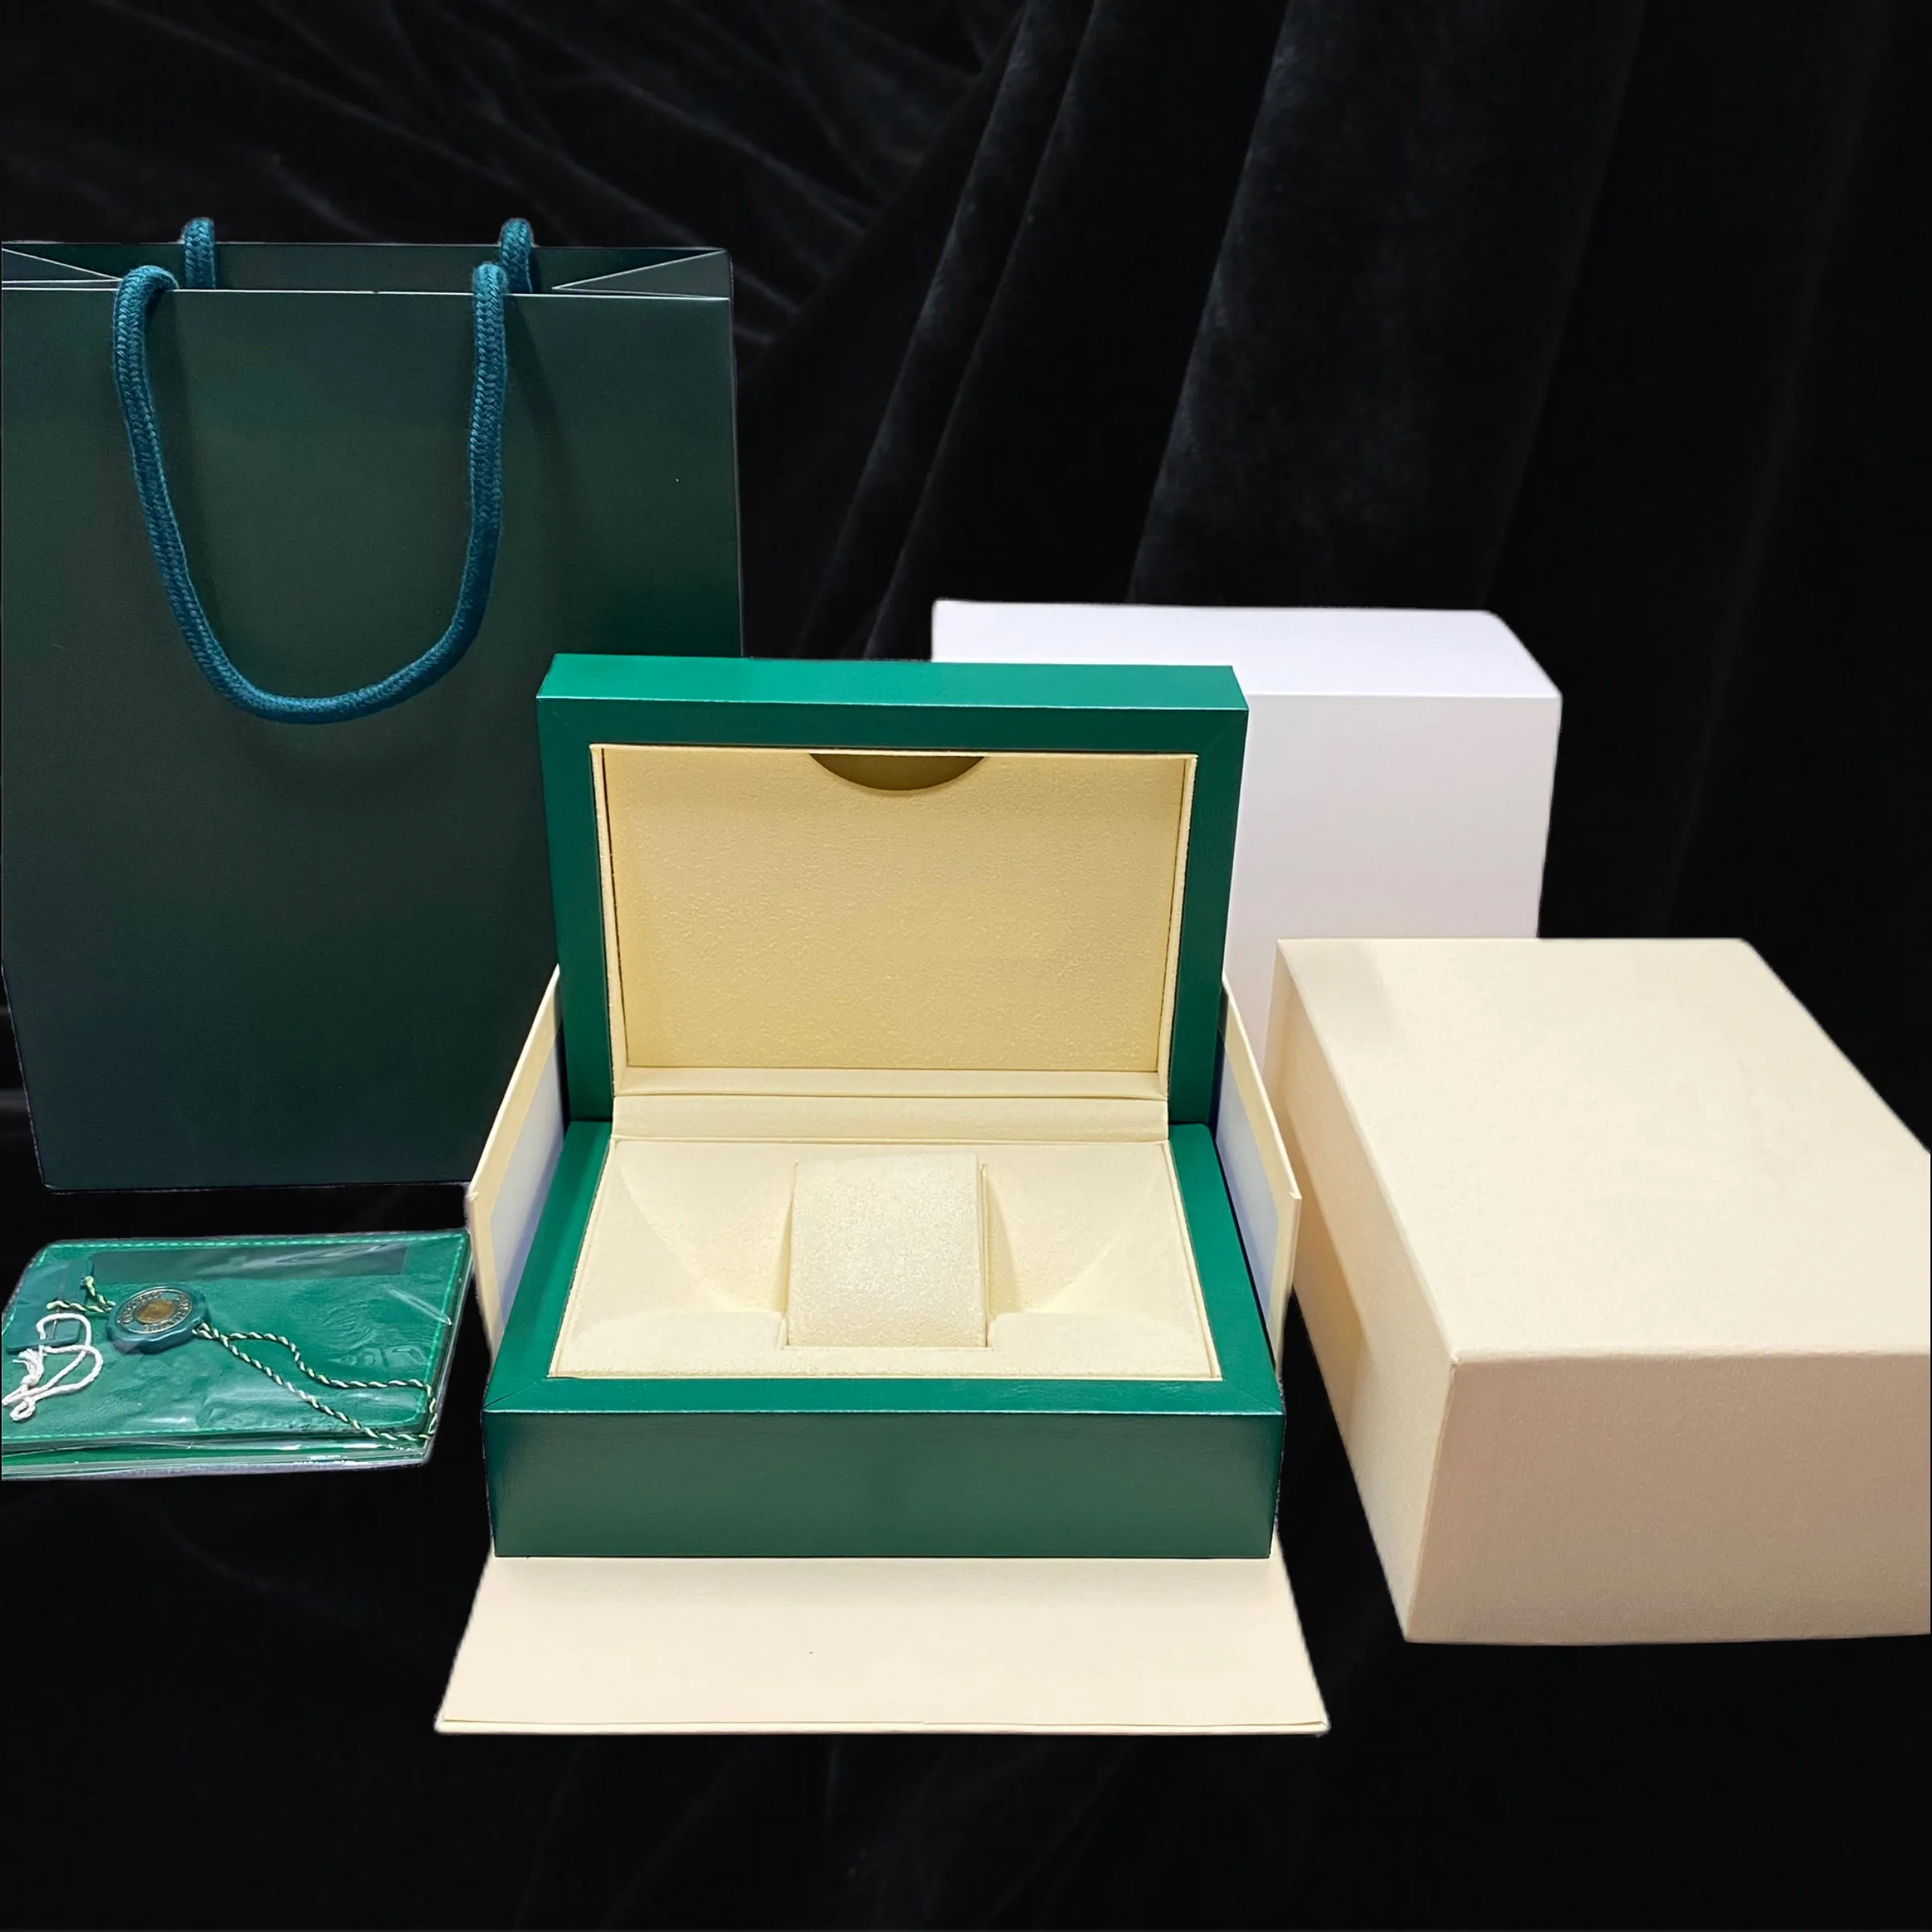 

Top Quality Green Watch Box Luxury Elegant AAA Leather Wooden Watch Case with Quality Packaging Storage with Microfiber Pillow